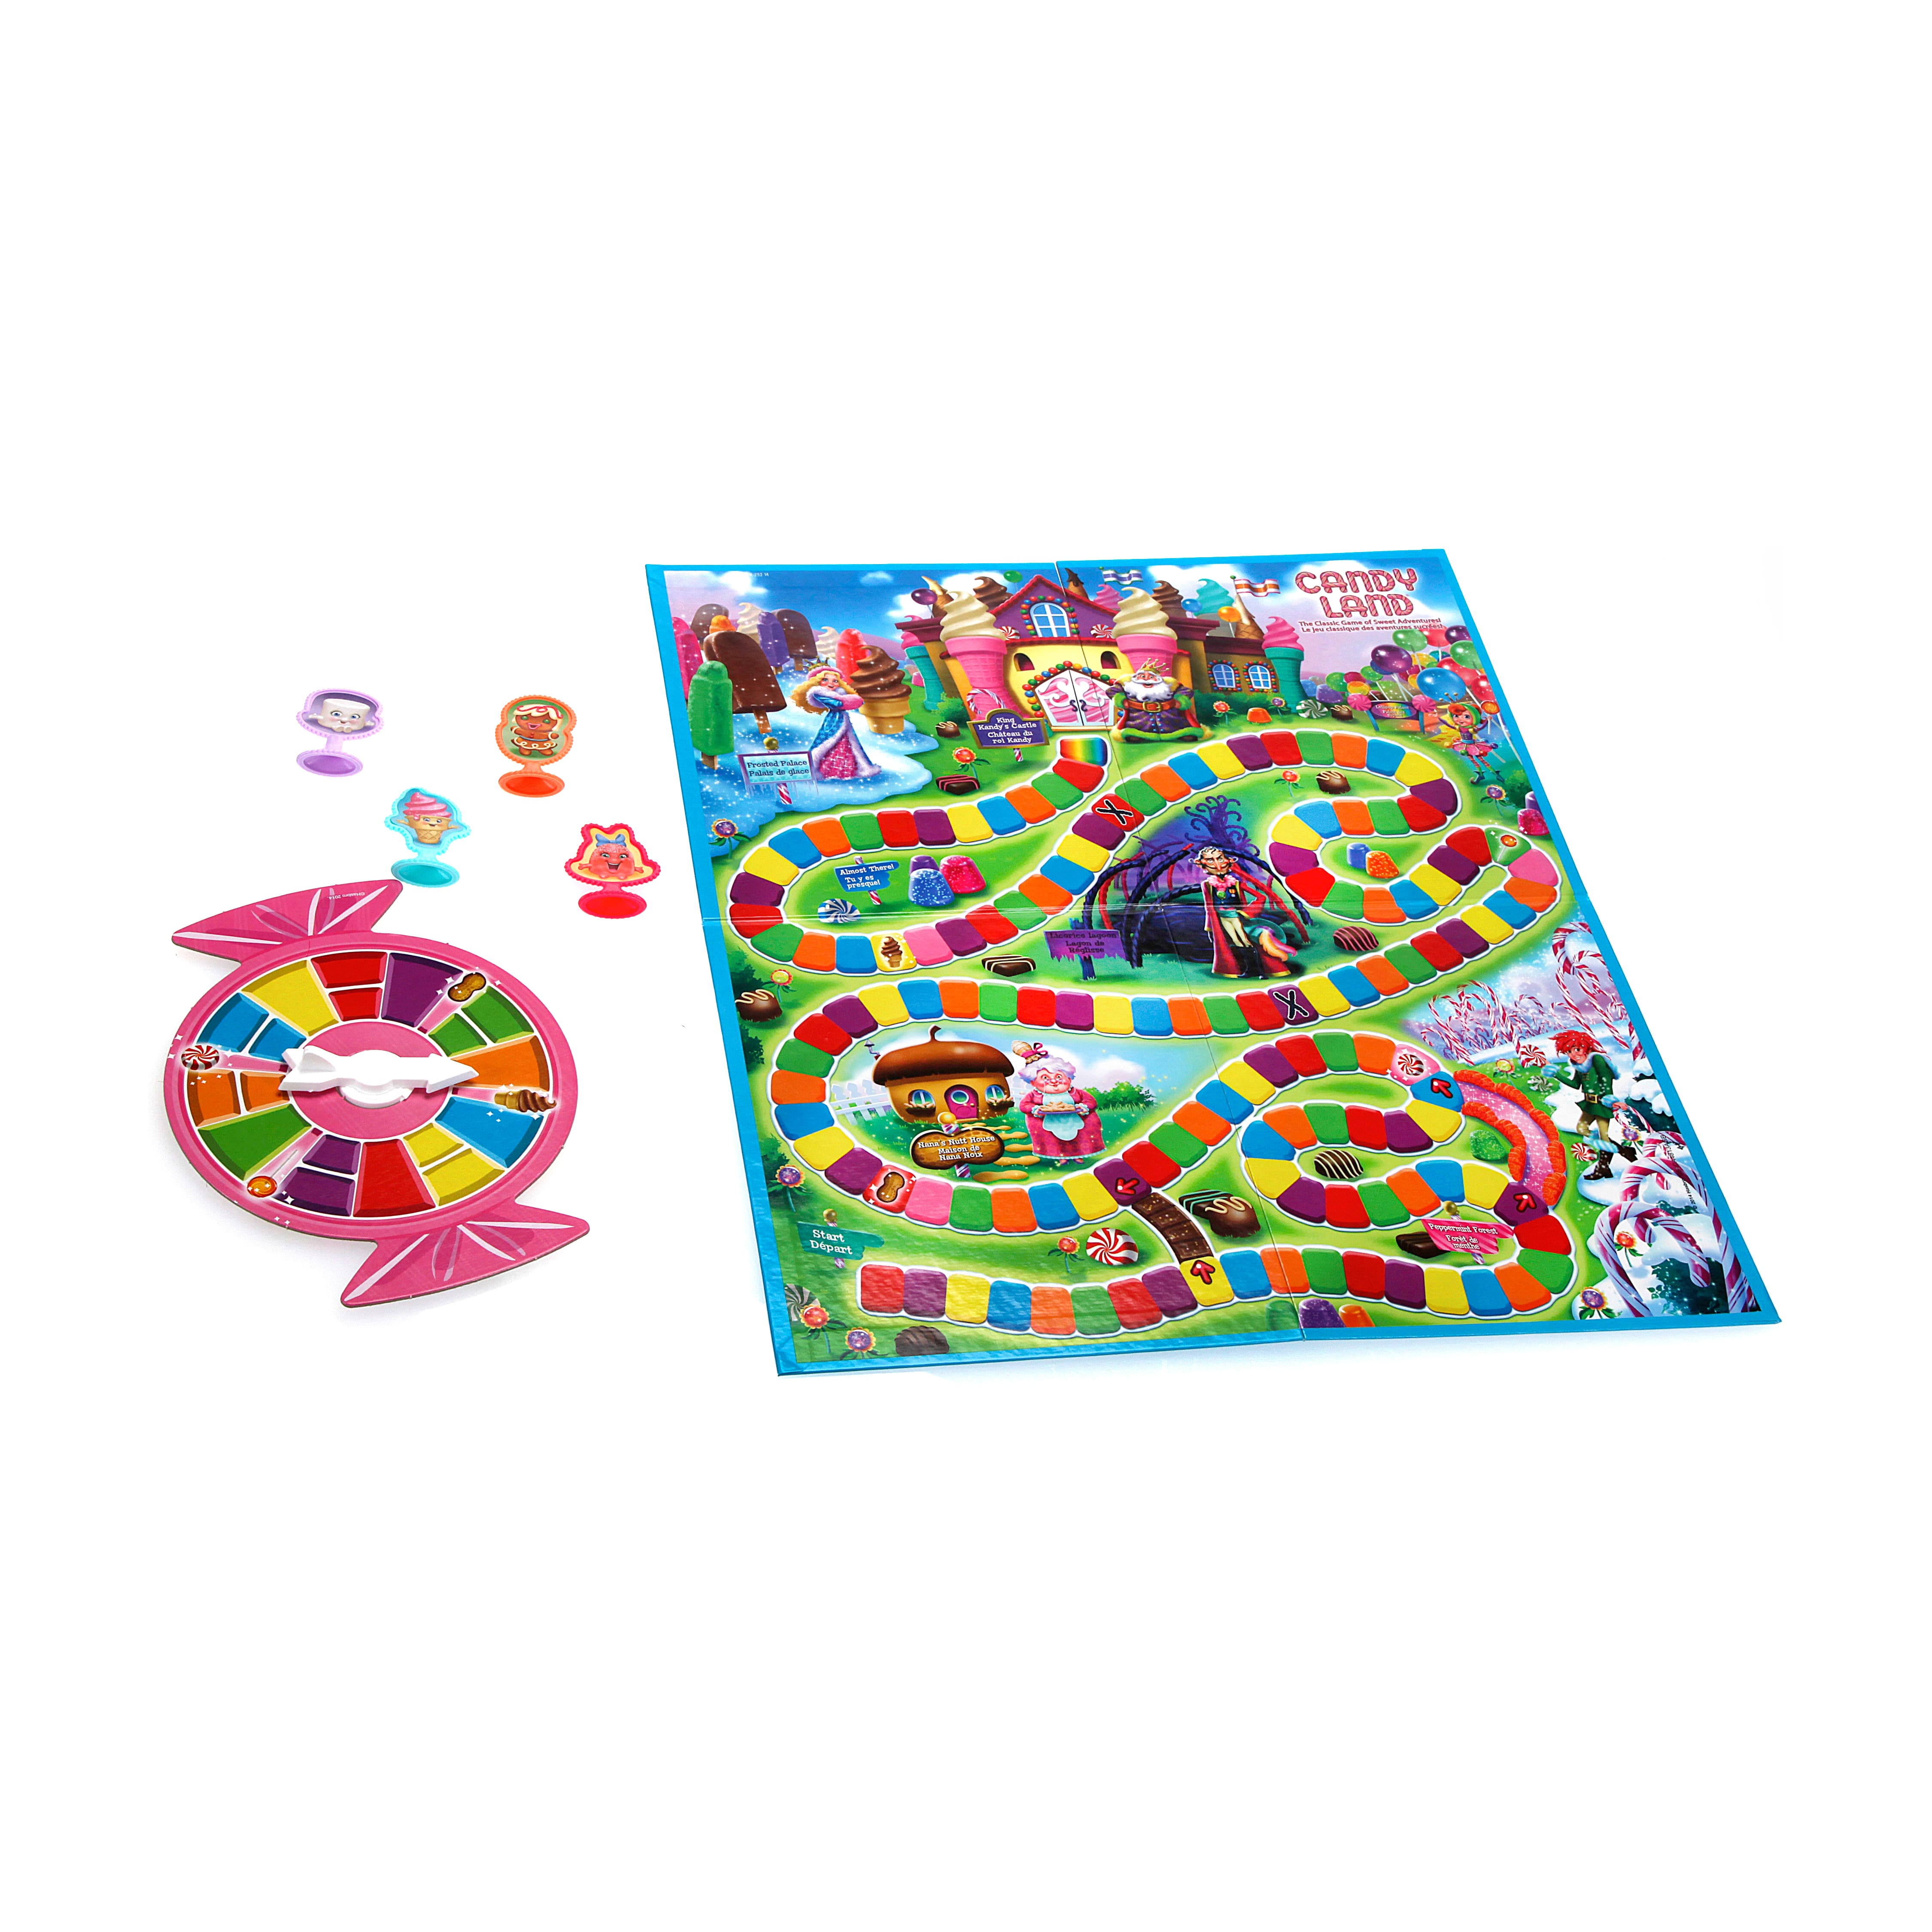 play candyland board game online for free no download